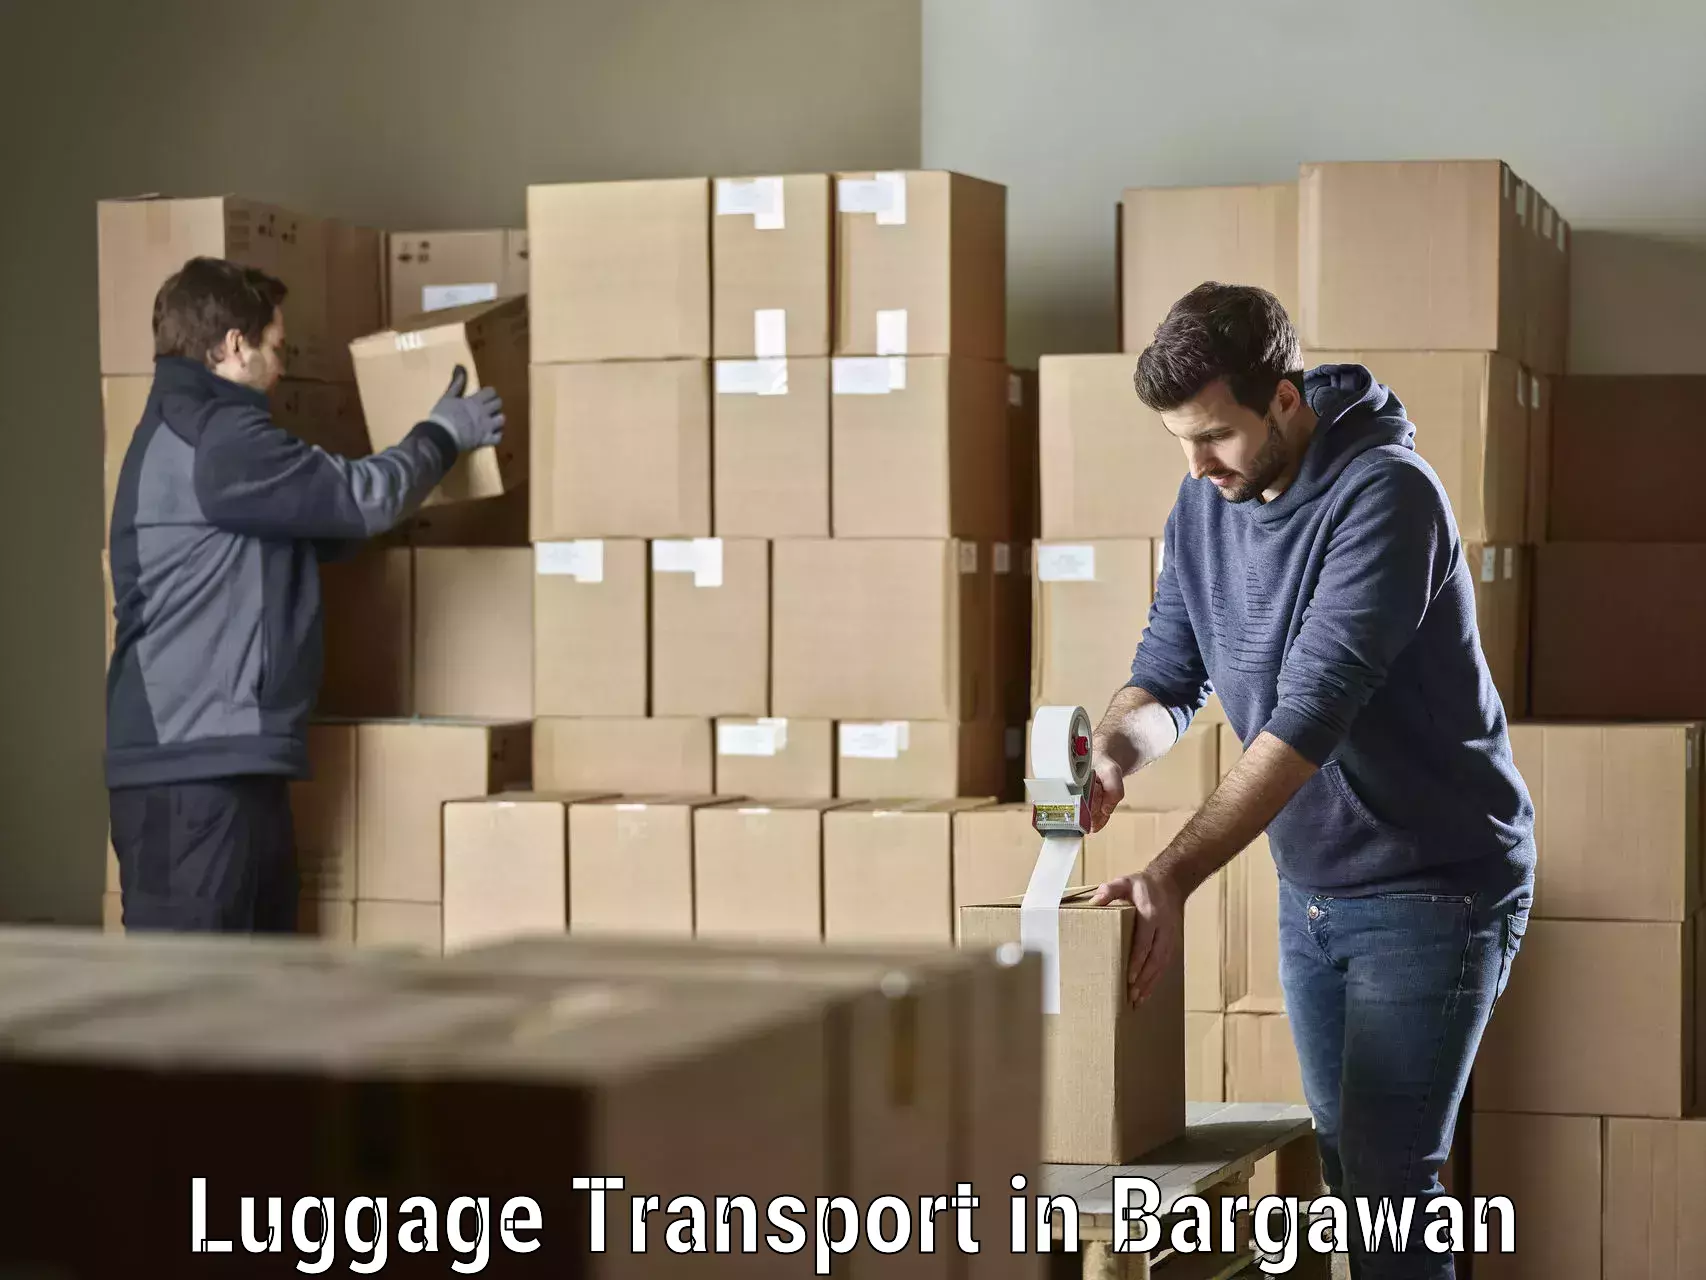 Luggage transport consulting in Bargawan